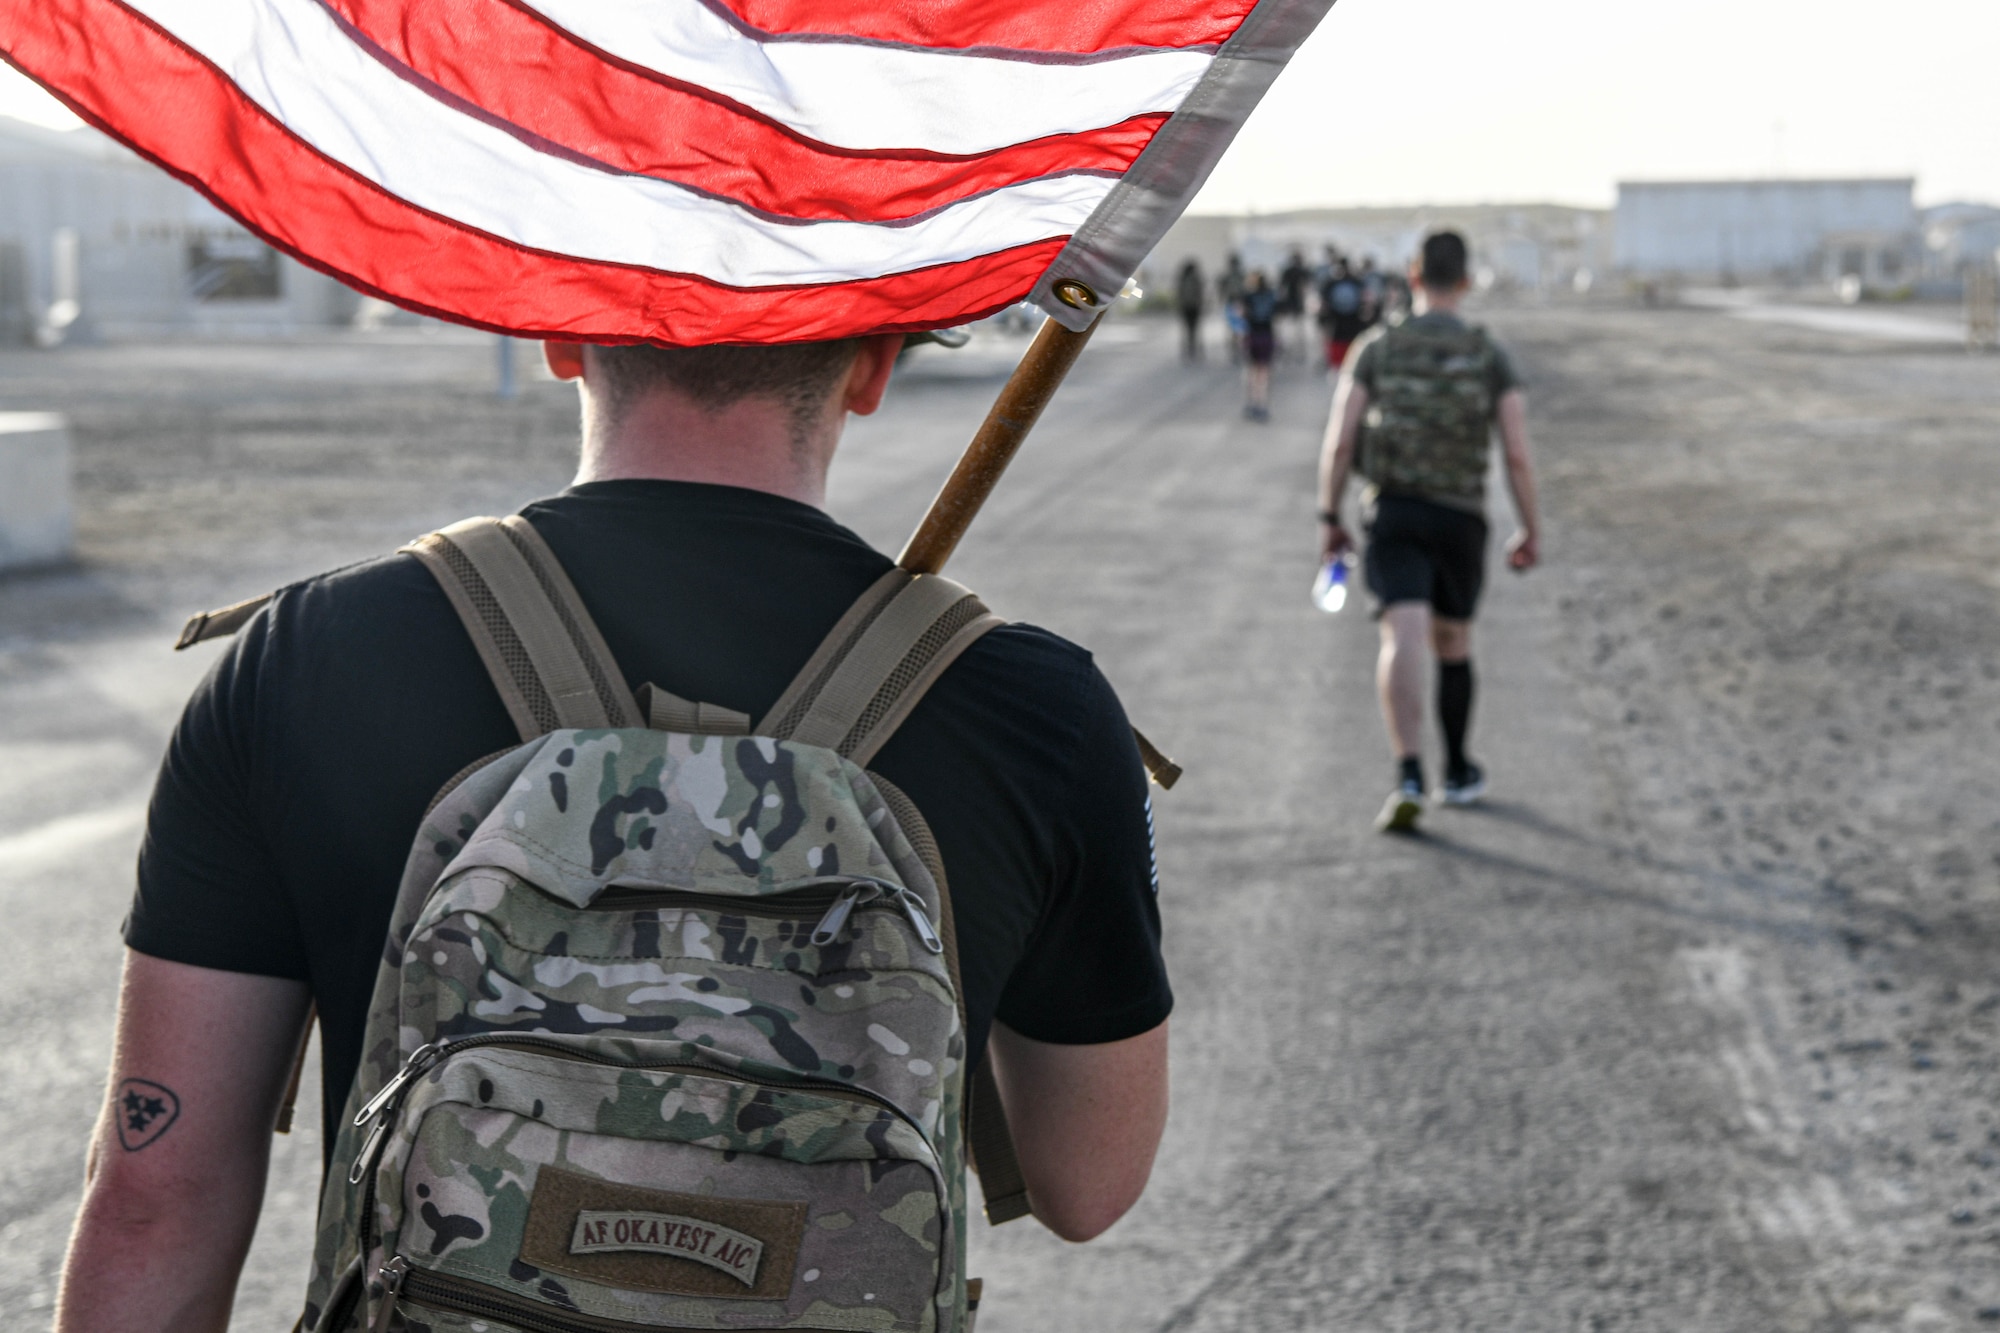 An Airman with the 380th Air Expeditionary wing carries the American flag during a memorial ruck and run event during Police Week, May 20th, 2022 at Al Dhafra Air Base, United Arab Emirates. In 1962, President John F. Kennedy signed a proclamation which designated May 15th as National Peace Officers Memorial Day, and the week in which it falls as National Police Week. Since the first service memorial gathering in Senate Park, Washington D.C., U.S. agencies across the nation and abroad have held events to honor fallen officers and acknowledge their sacrifices.